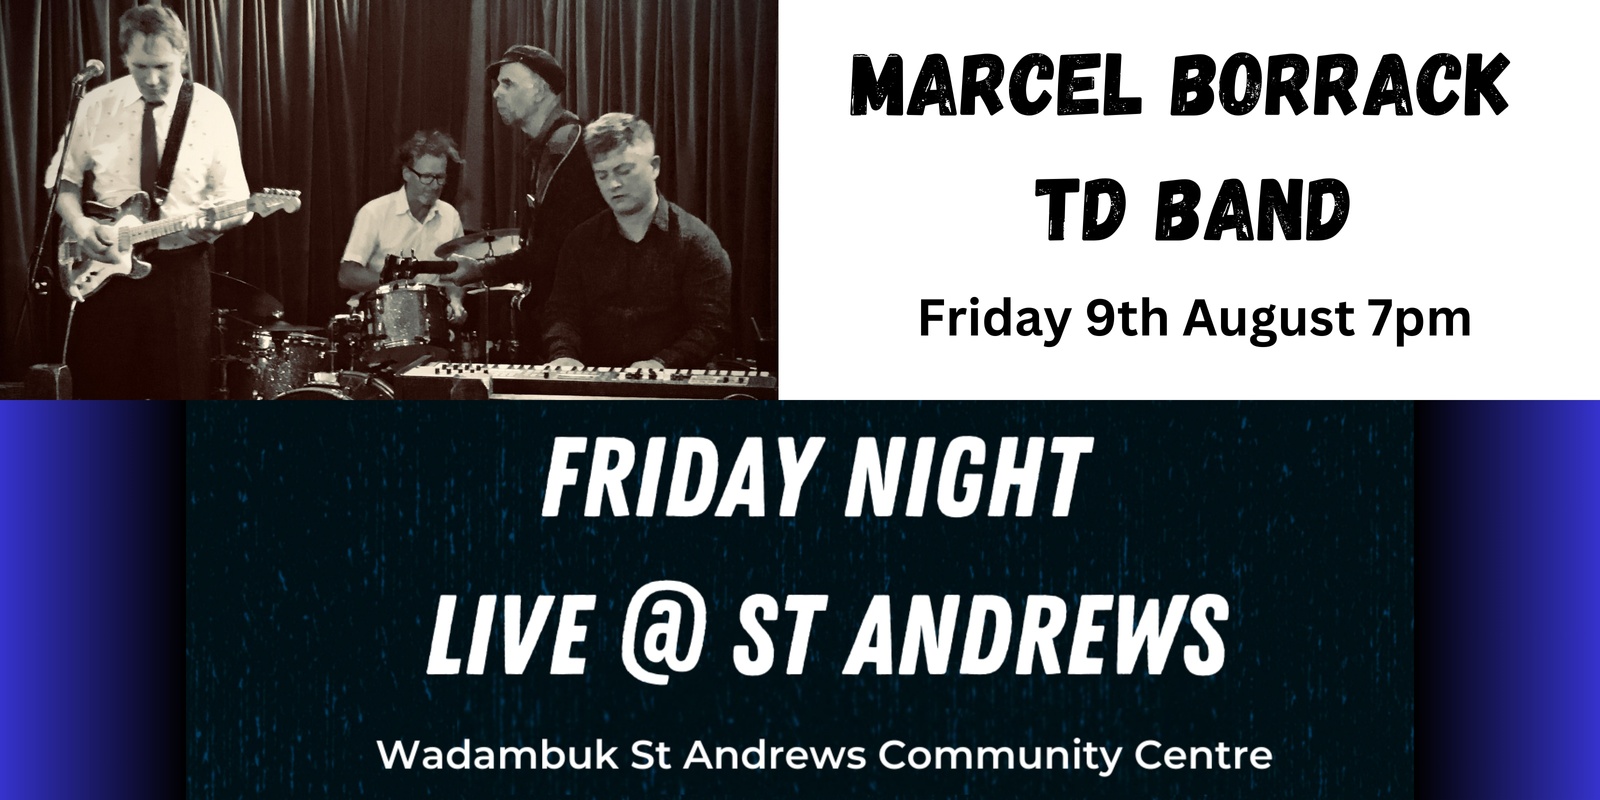 Banner image for Marcel Borrack TD Band and Keets Friday Night Live@St Andrews